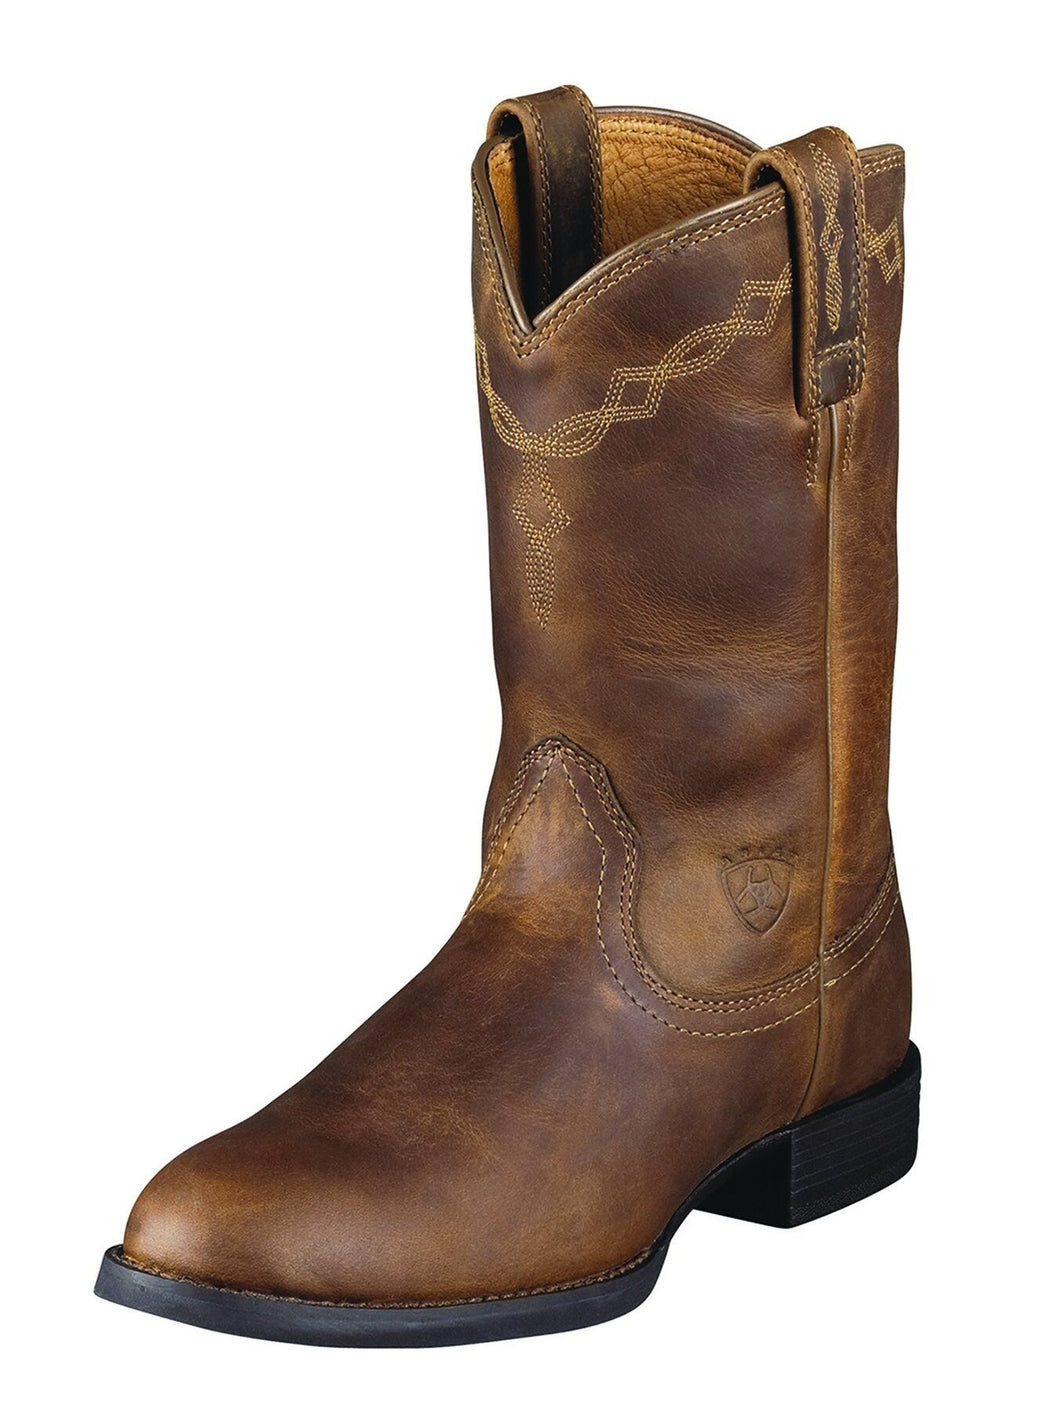 ARIAT Boots - Womens Heritage Roper Western Cowgirl - Distressed Brown